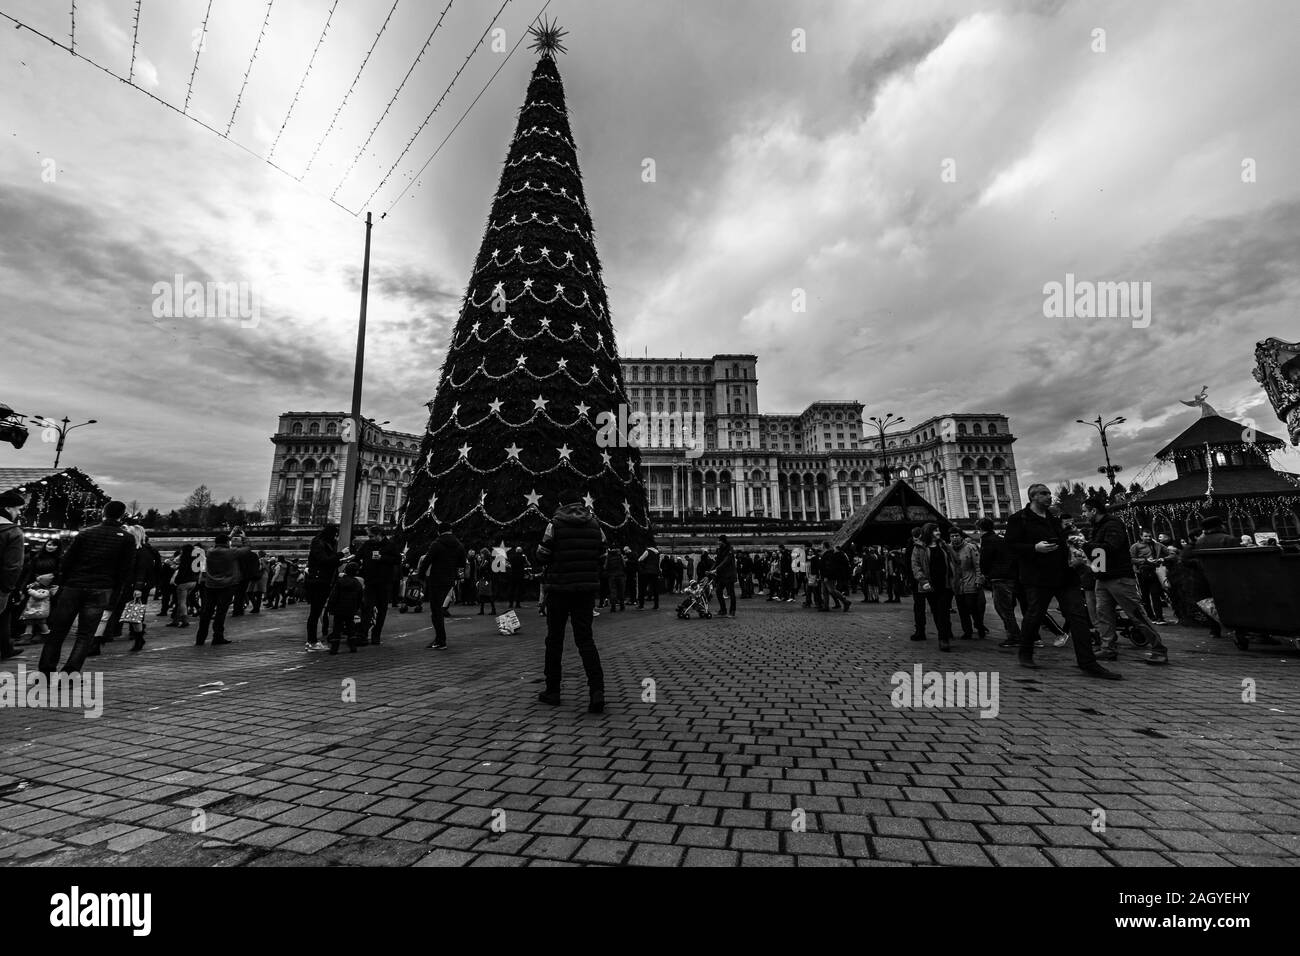 Bucharest Christmas market in front of the Palace of Parliament, Christmas tree, lights, people wandering at the Christmas market in Bucharest, Romani Stock Photo